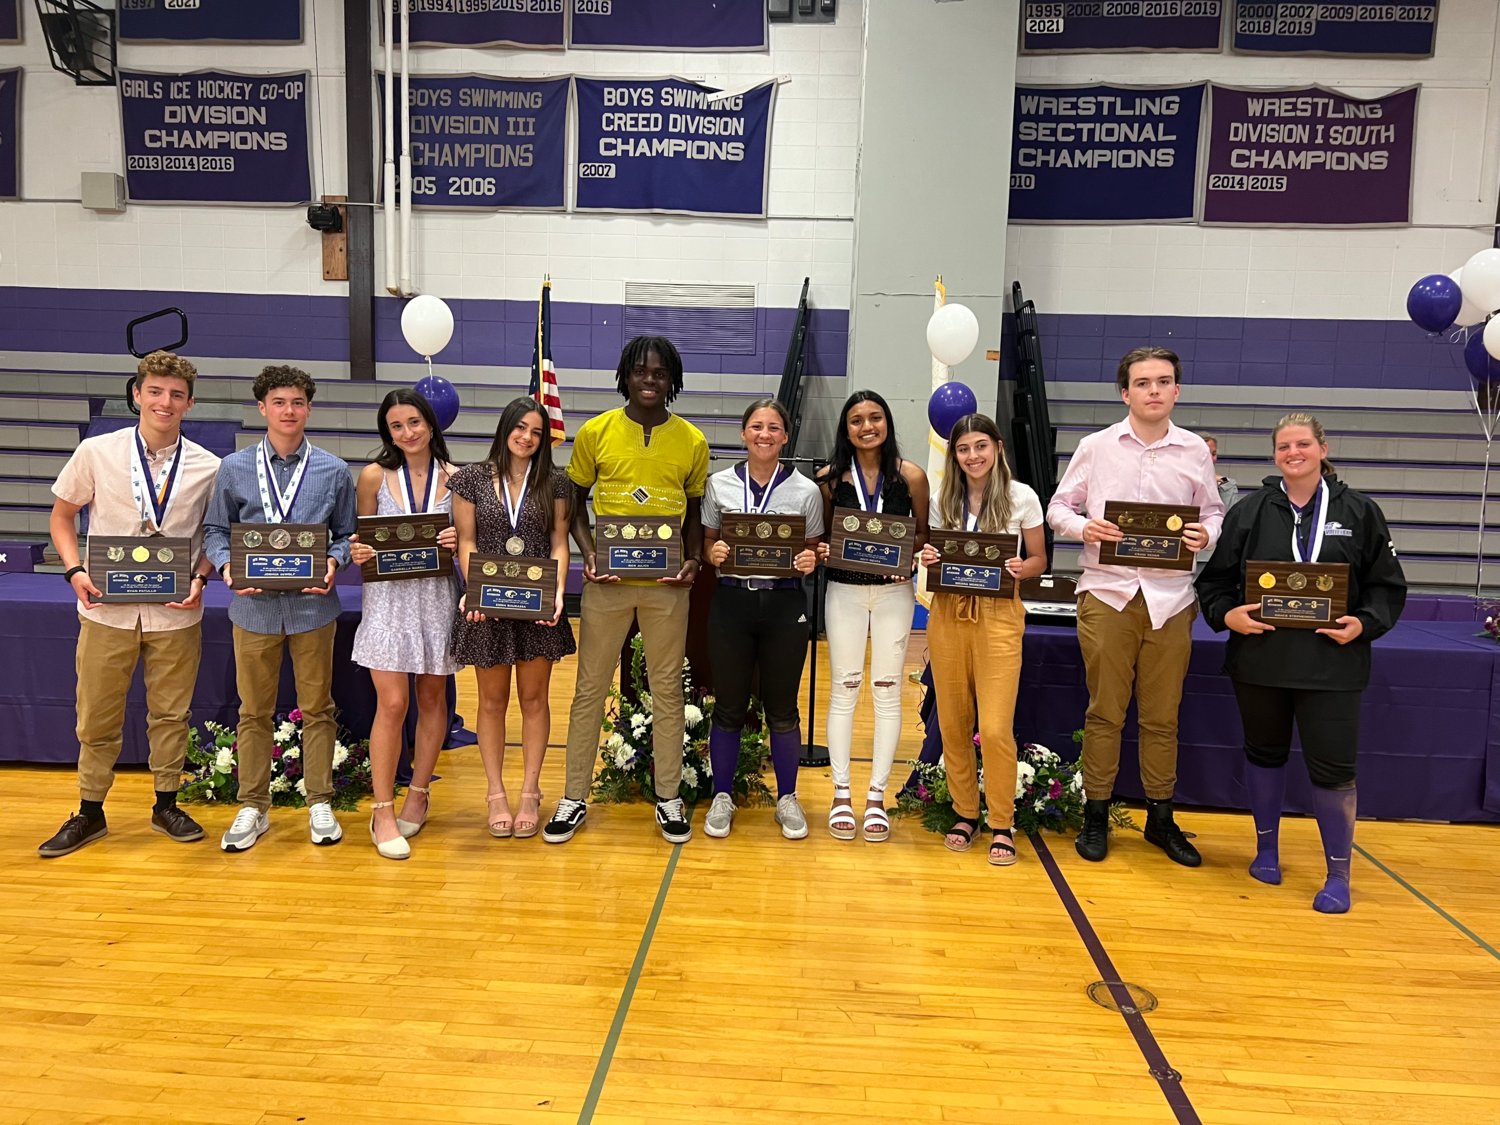 Joshua deWolf, Cross-Country, Basketball, Lacrosse; Gabriella Marsili, Cross-Country, Indoor Track, Outdoor Track; Emma Bourassa, Soccer, Indoor Track, Lacrosse Rick Julien, Football, Basketball, Track, Volleyball; Logan Levesque, Soccer, Basketball, Softball; Aditi Mehta, Tennis, Basketball, Outdoor Track; Briana Moreira, Cross-Country, Indoor Track, Outdoor Track; Ryan Patullo, Swim, Unified Basketball, Volleyball; and Craig Vedar, Football, Wrestling, Lacrosse Grace Stephenson Volleyball, Basketball, Softball, received the 3-Sport Athlete Awards.